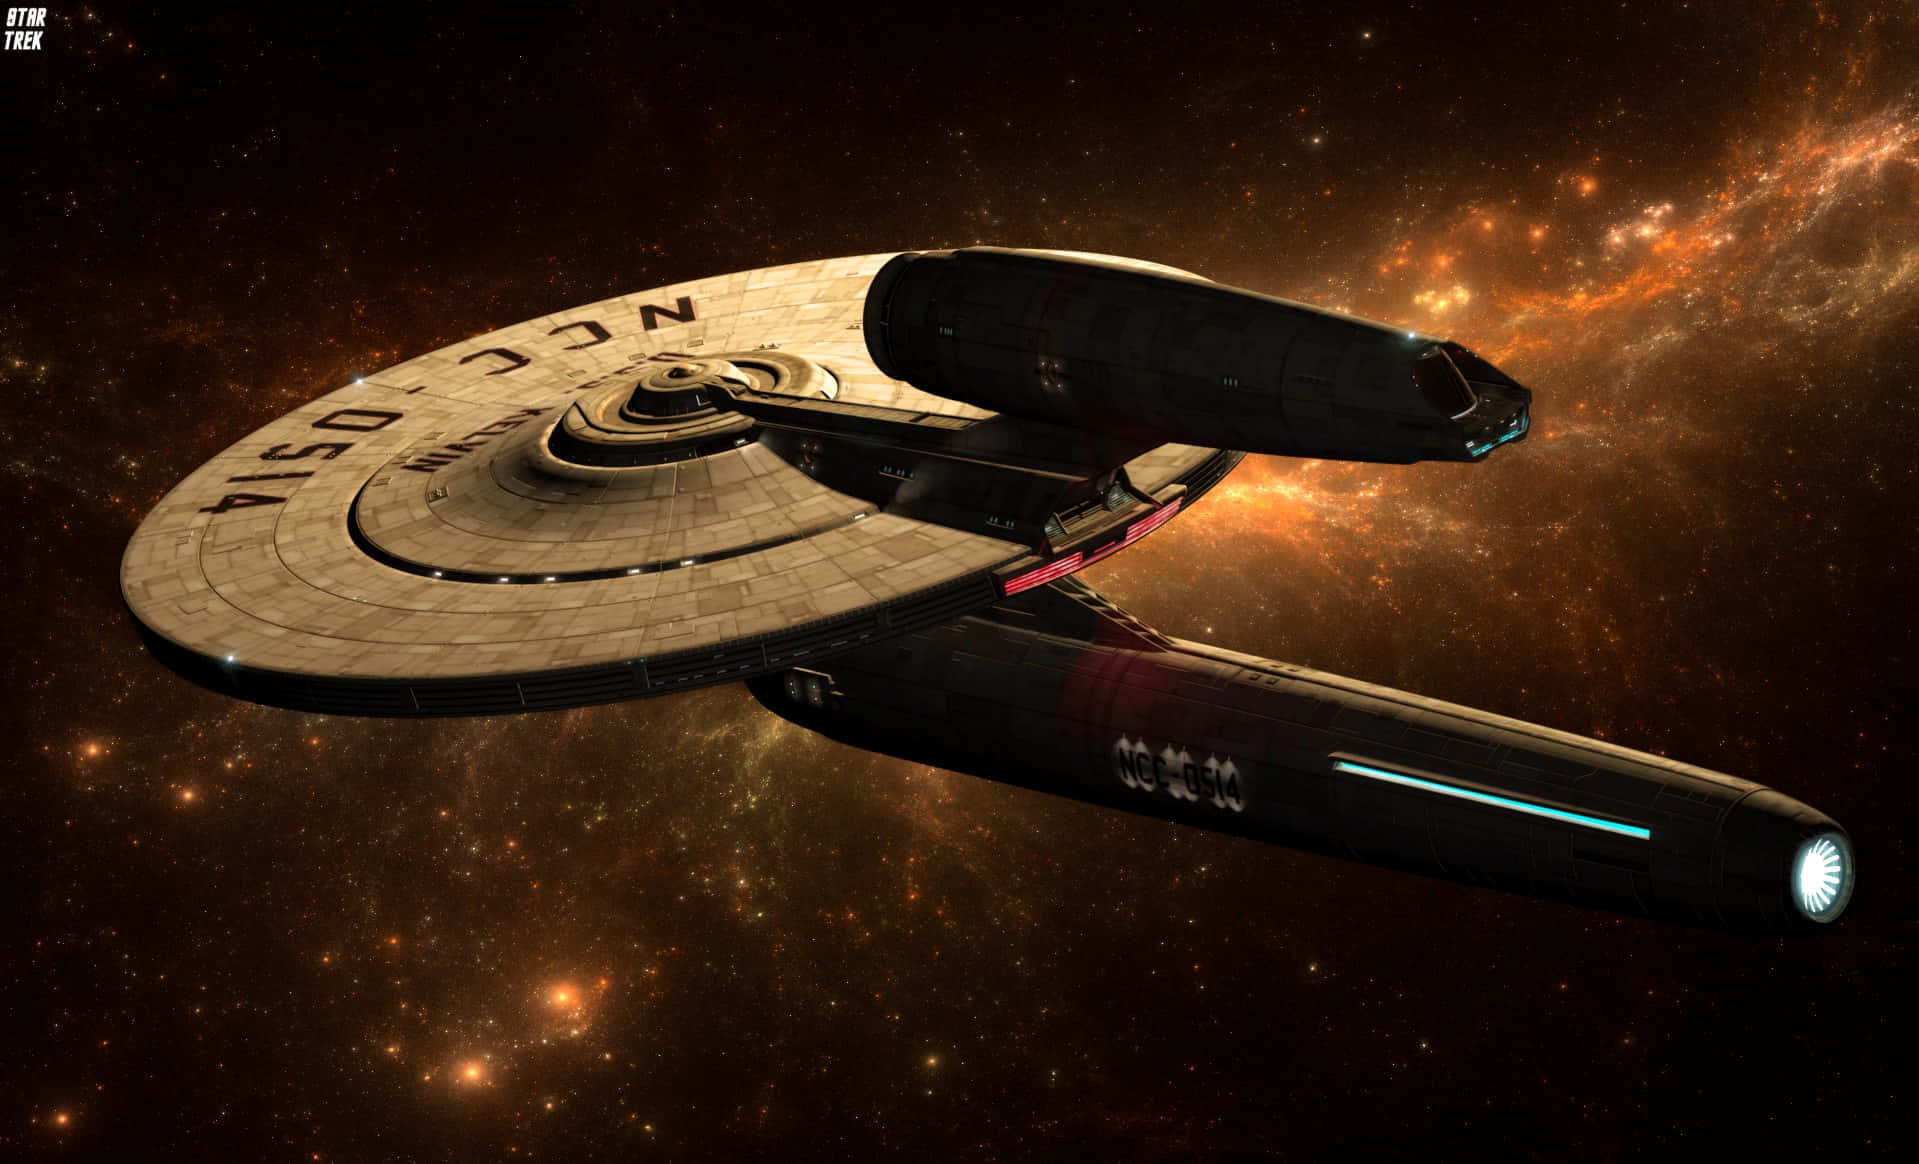 Travel to the future and explore the universe through Star Trek Zoom.